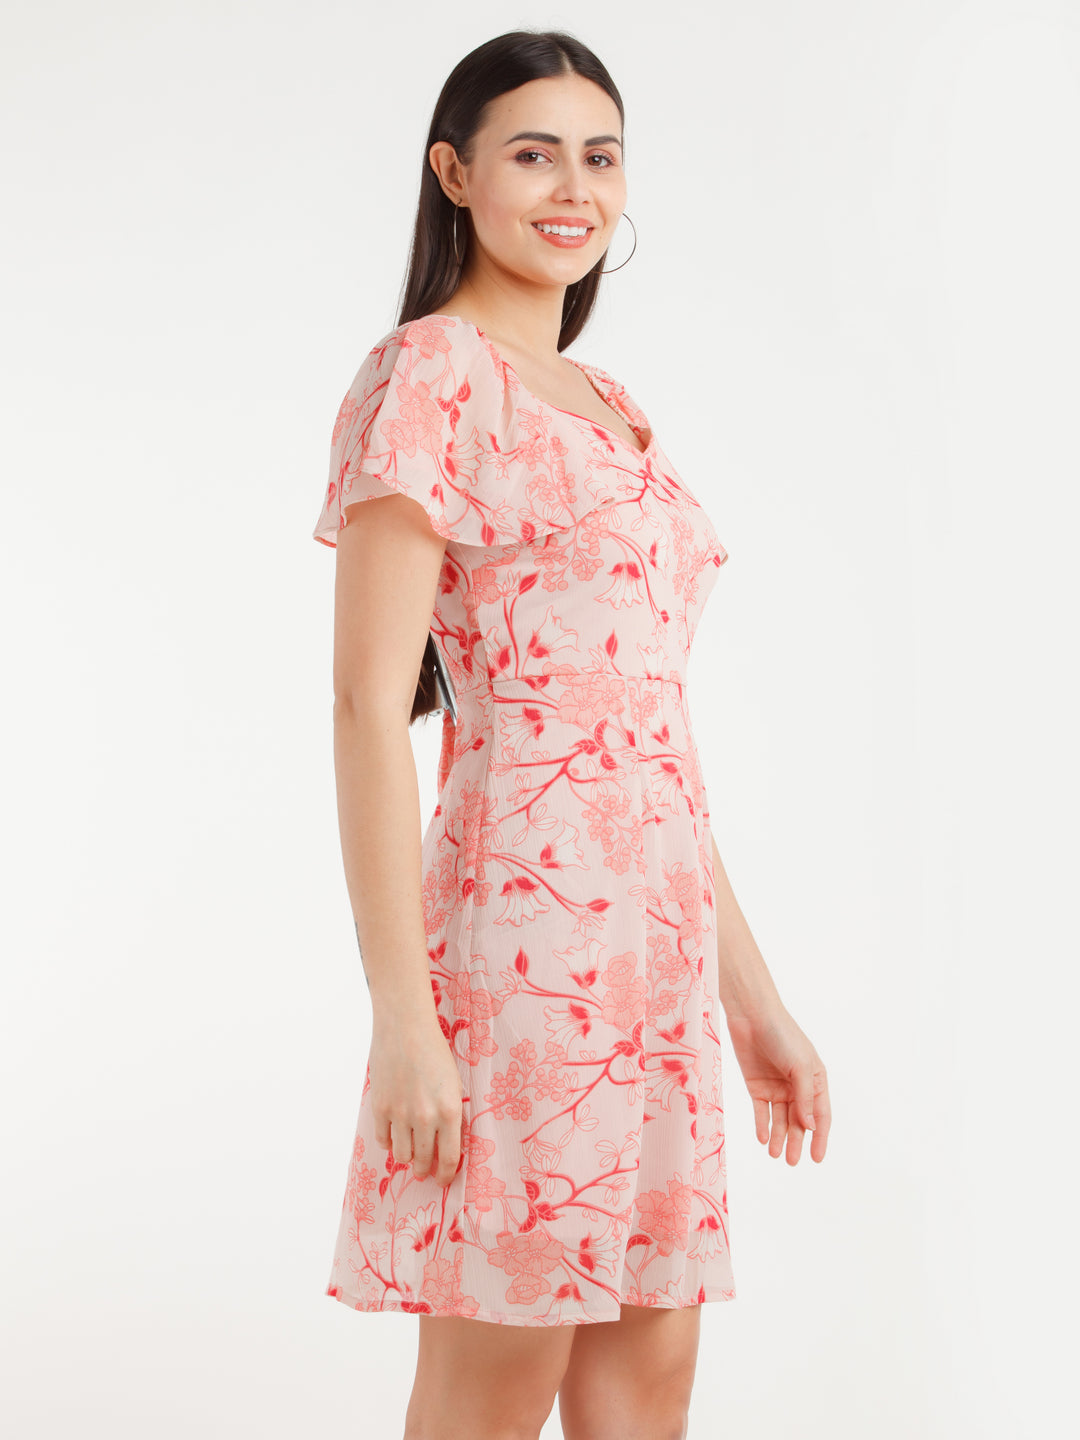 Pink Floral Mini Dress For Women